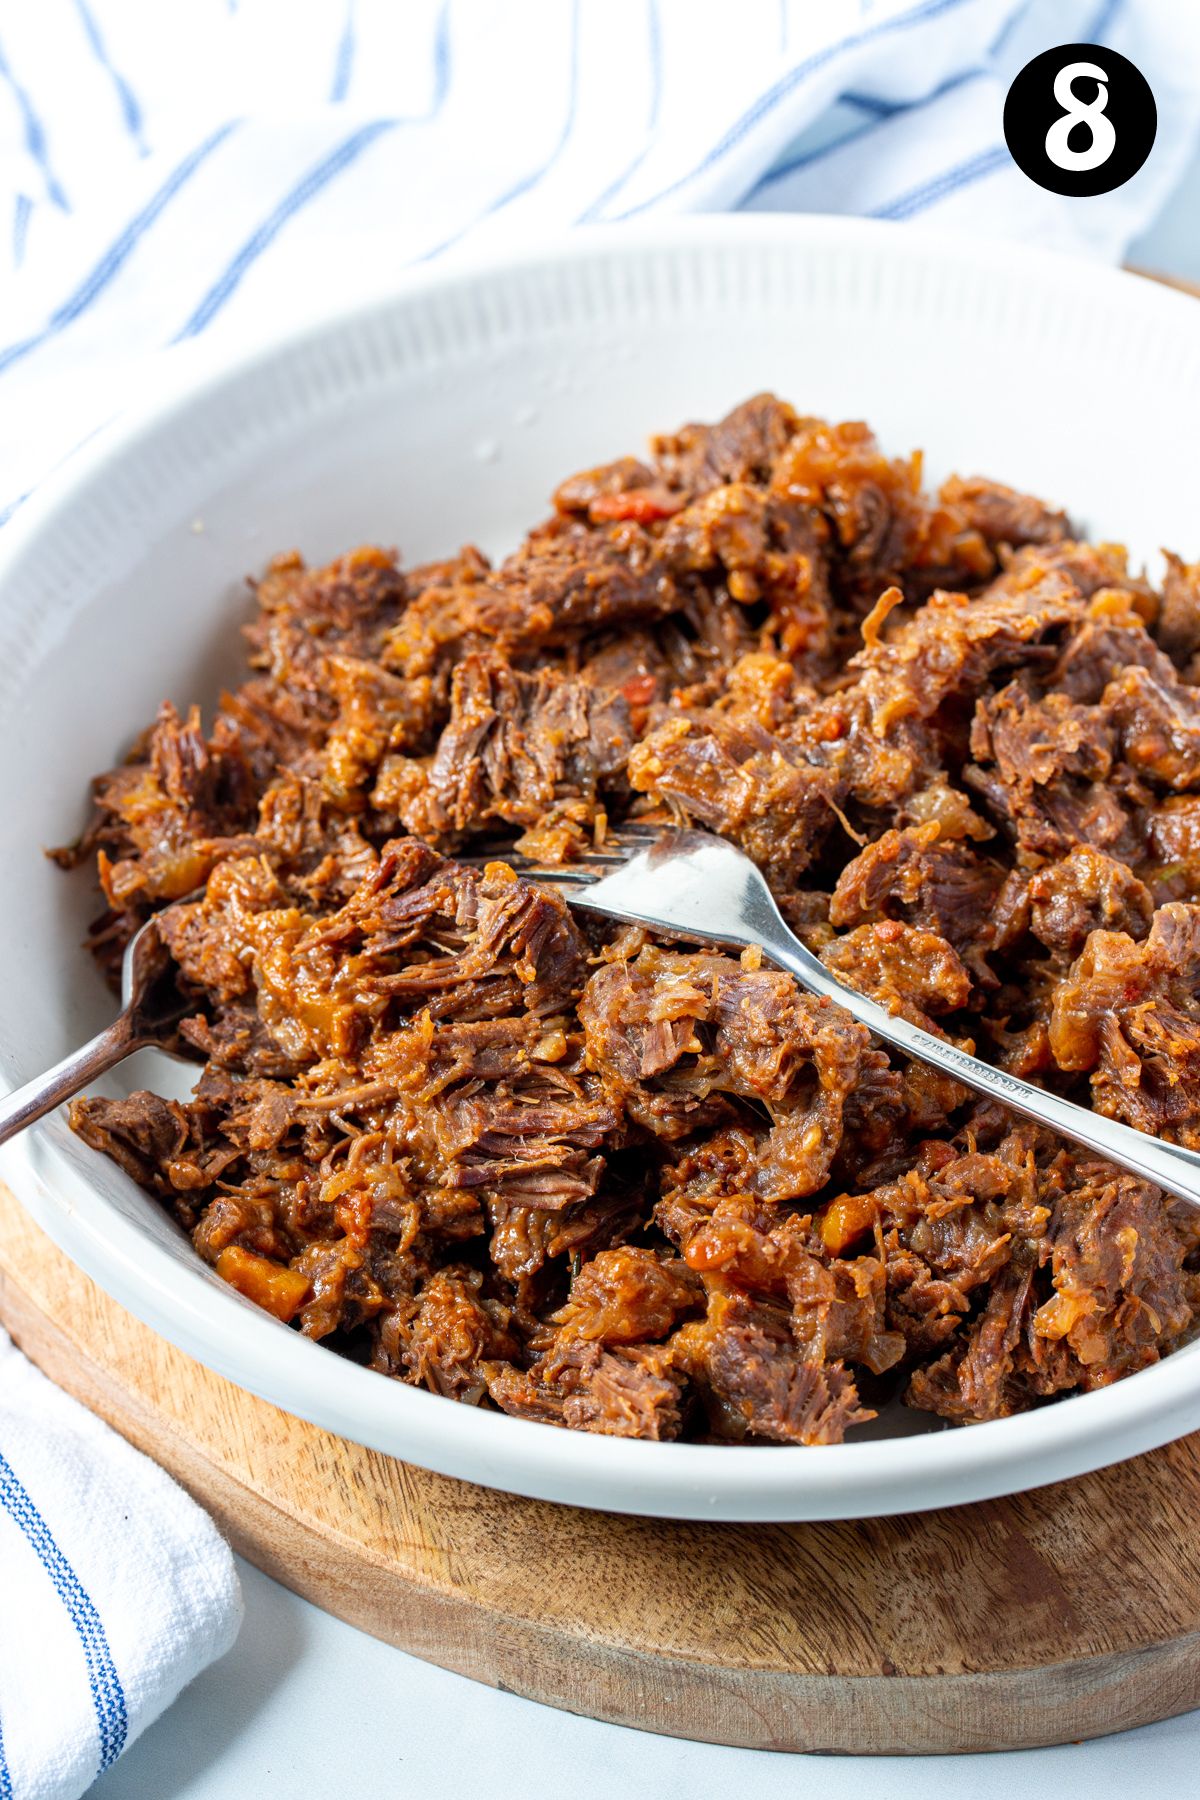 shredded beef cheeks in a bowl with forks.